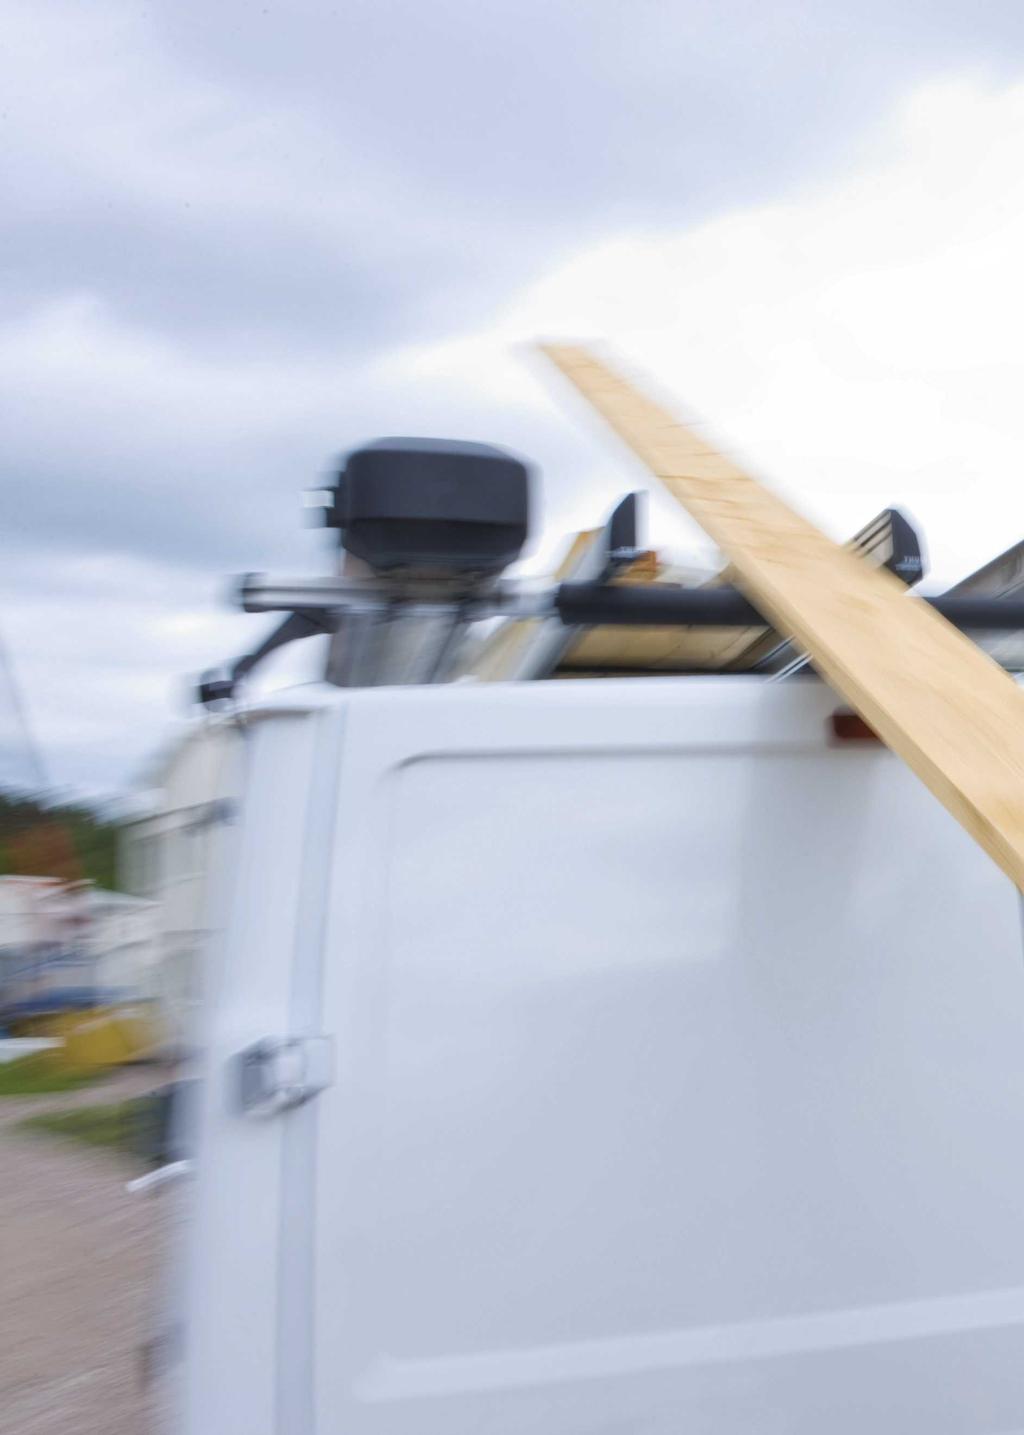 16 You know how tricky it can be to secure timber or other material to your vehicle roof.